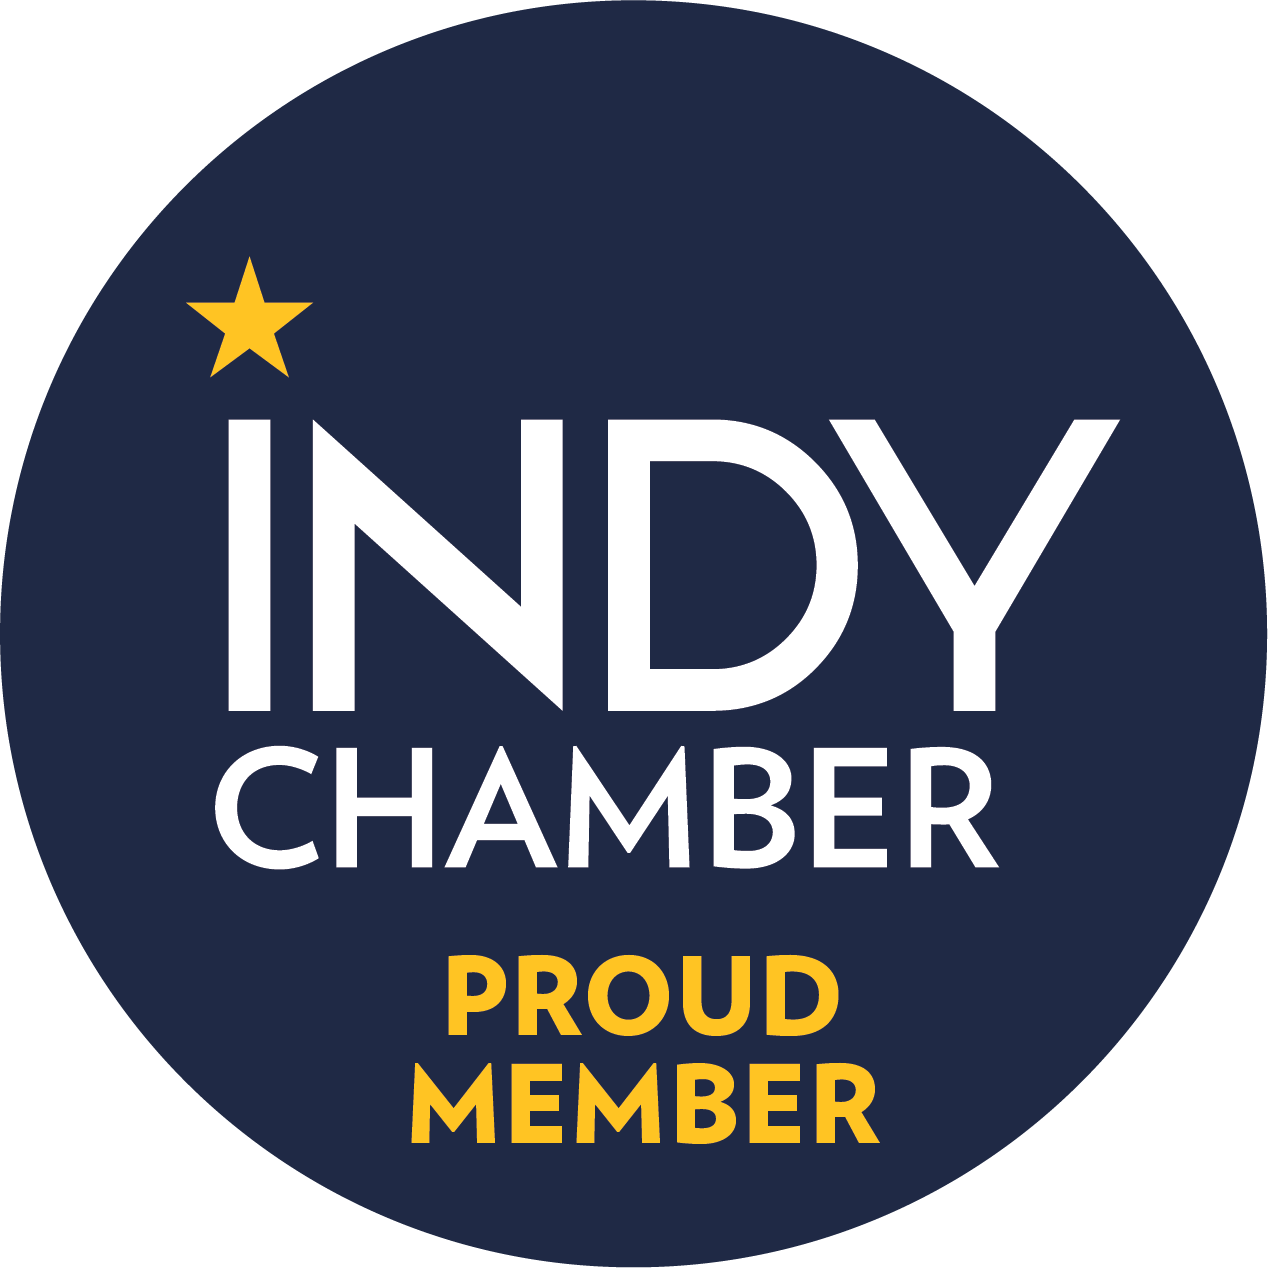 Indy Chamber of Commerce logo